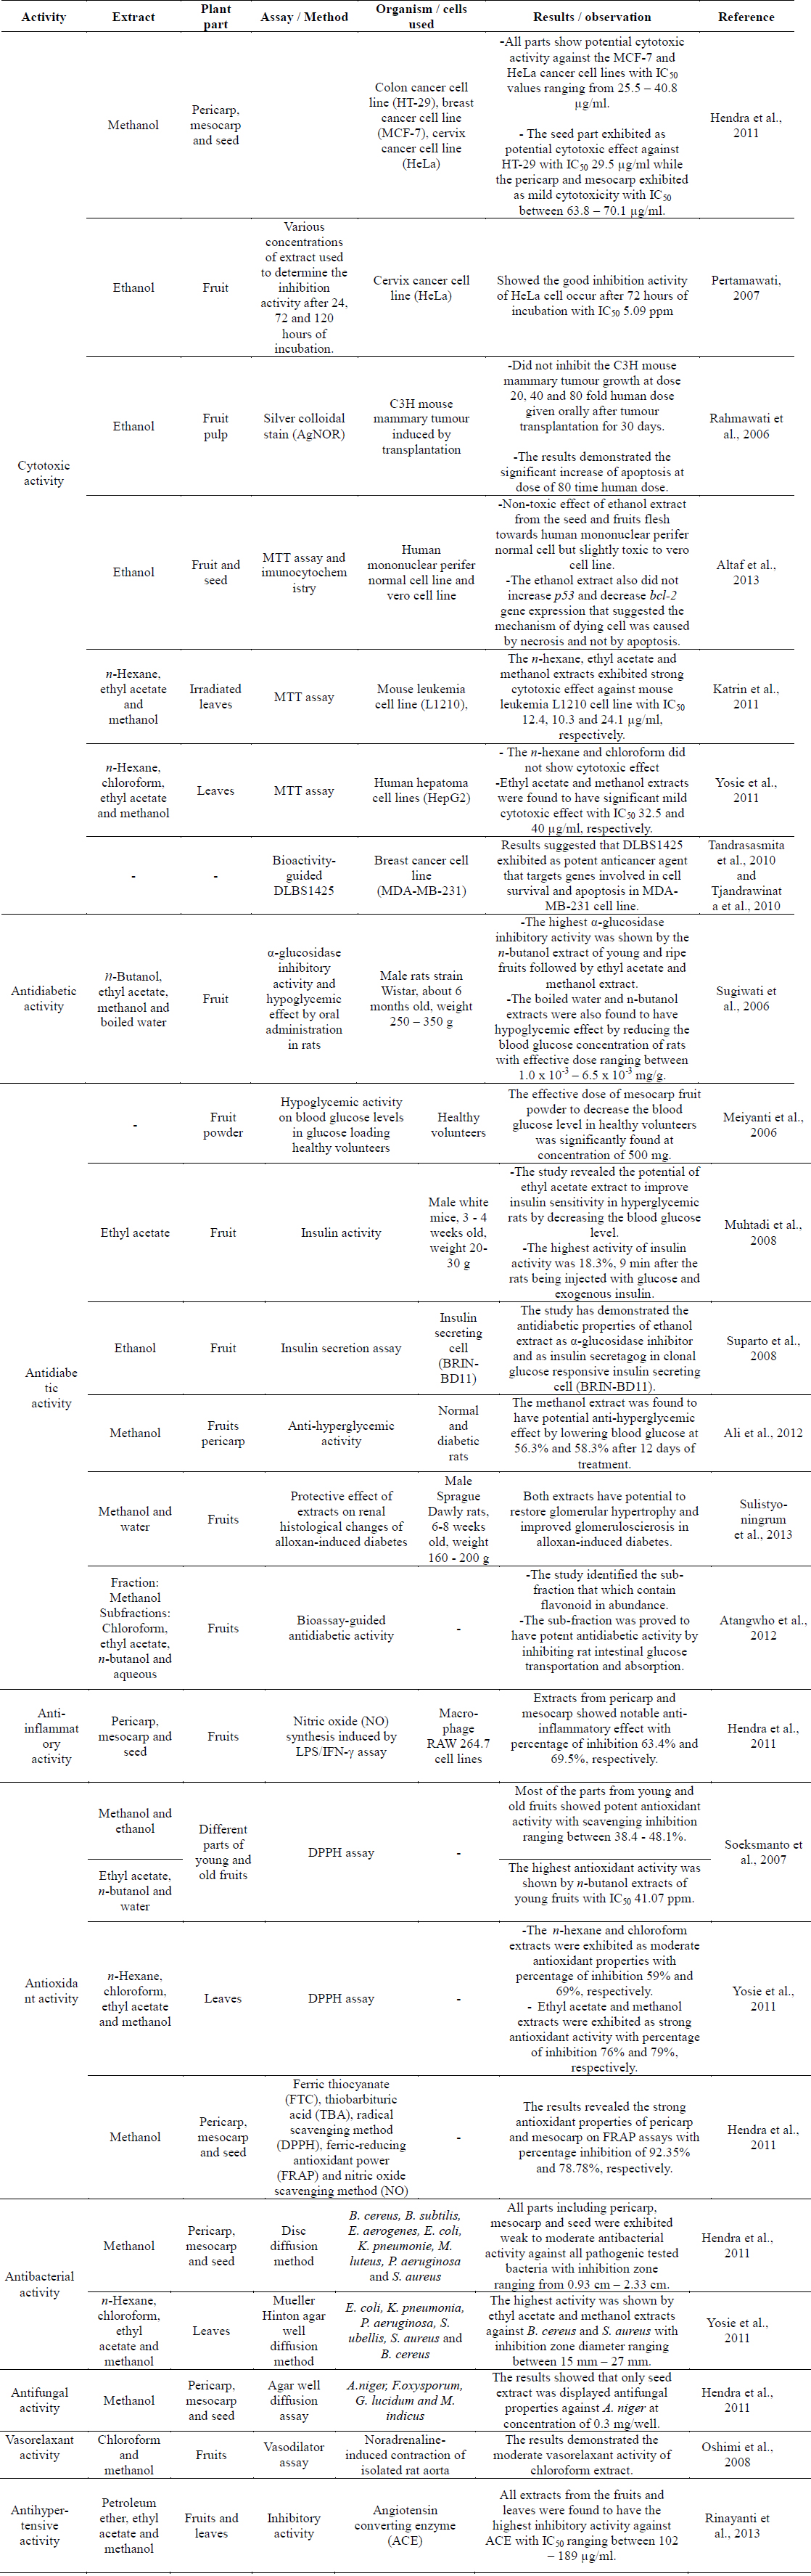 Summary of pharmacological activities of extracts from P. macrocarpa